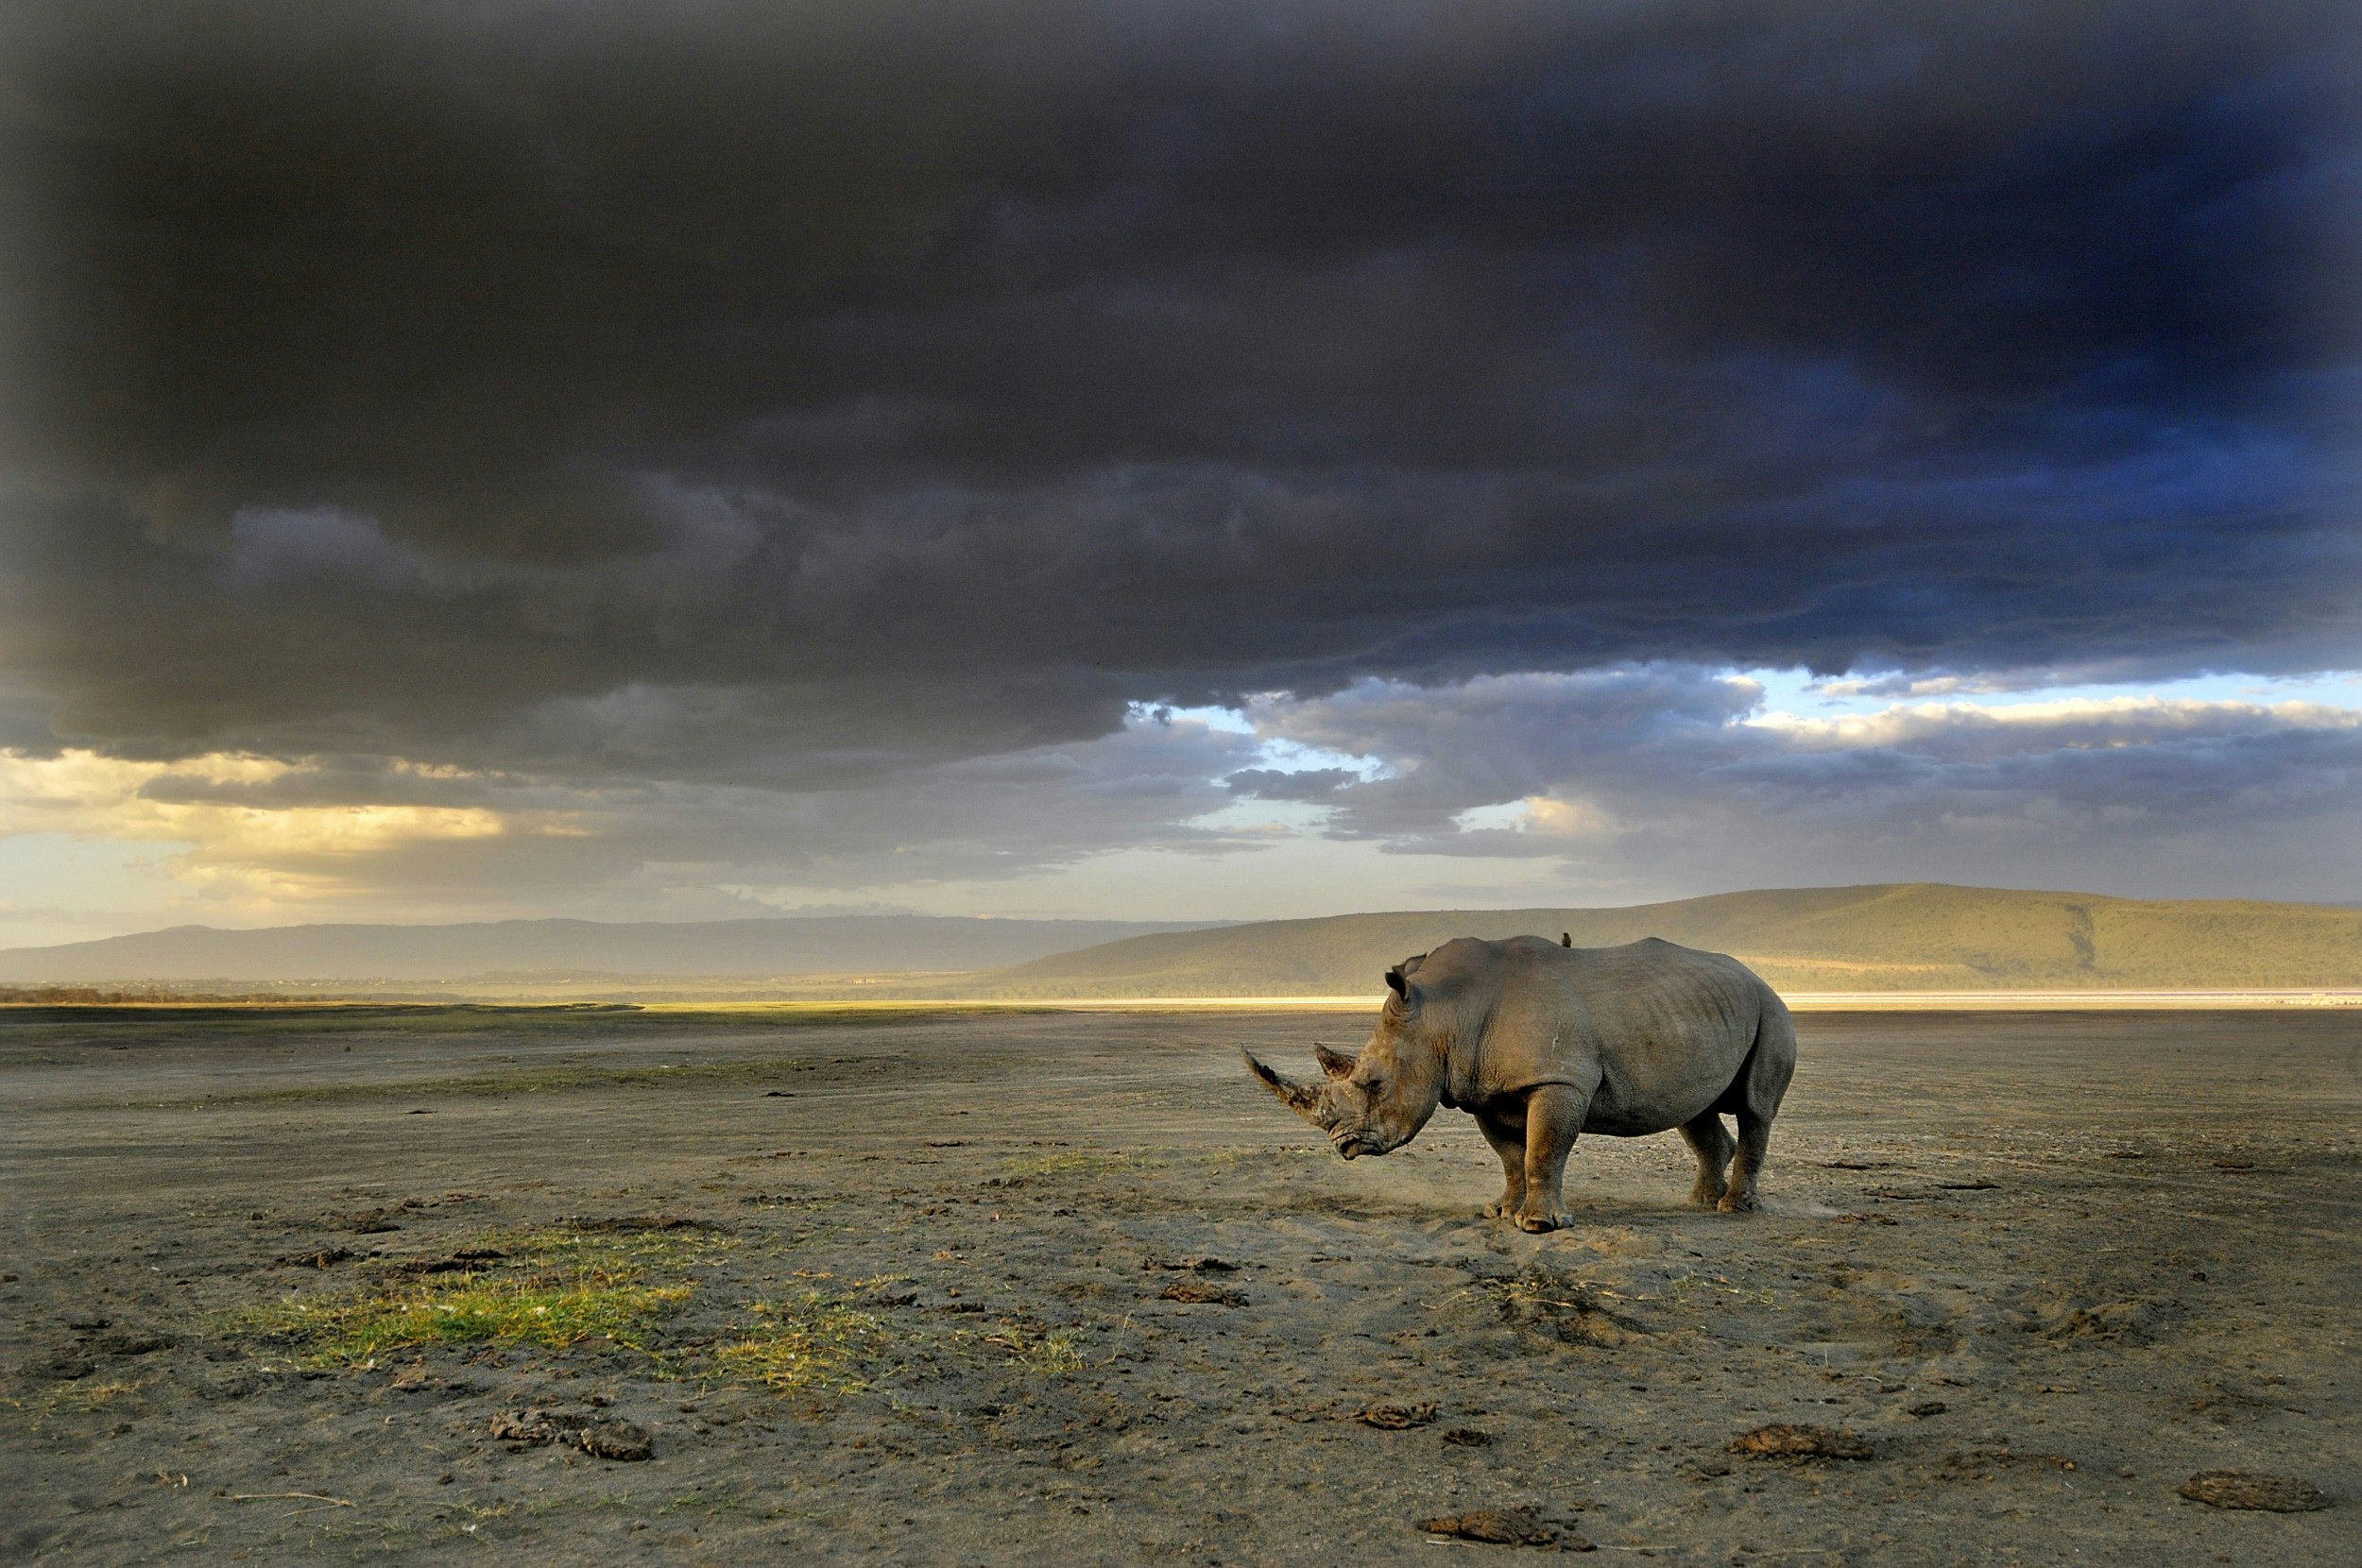 A white rhino awaits a rain storm that is on the horizon; it stands on the dusty shores of Lake Naivasha.